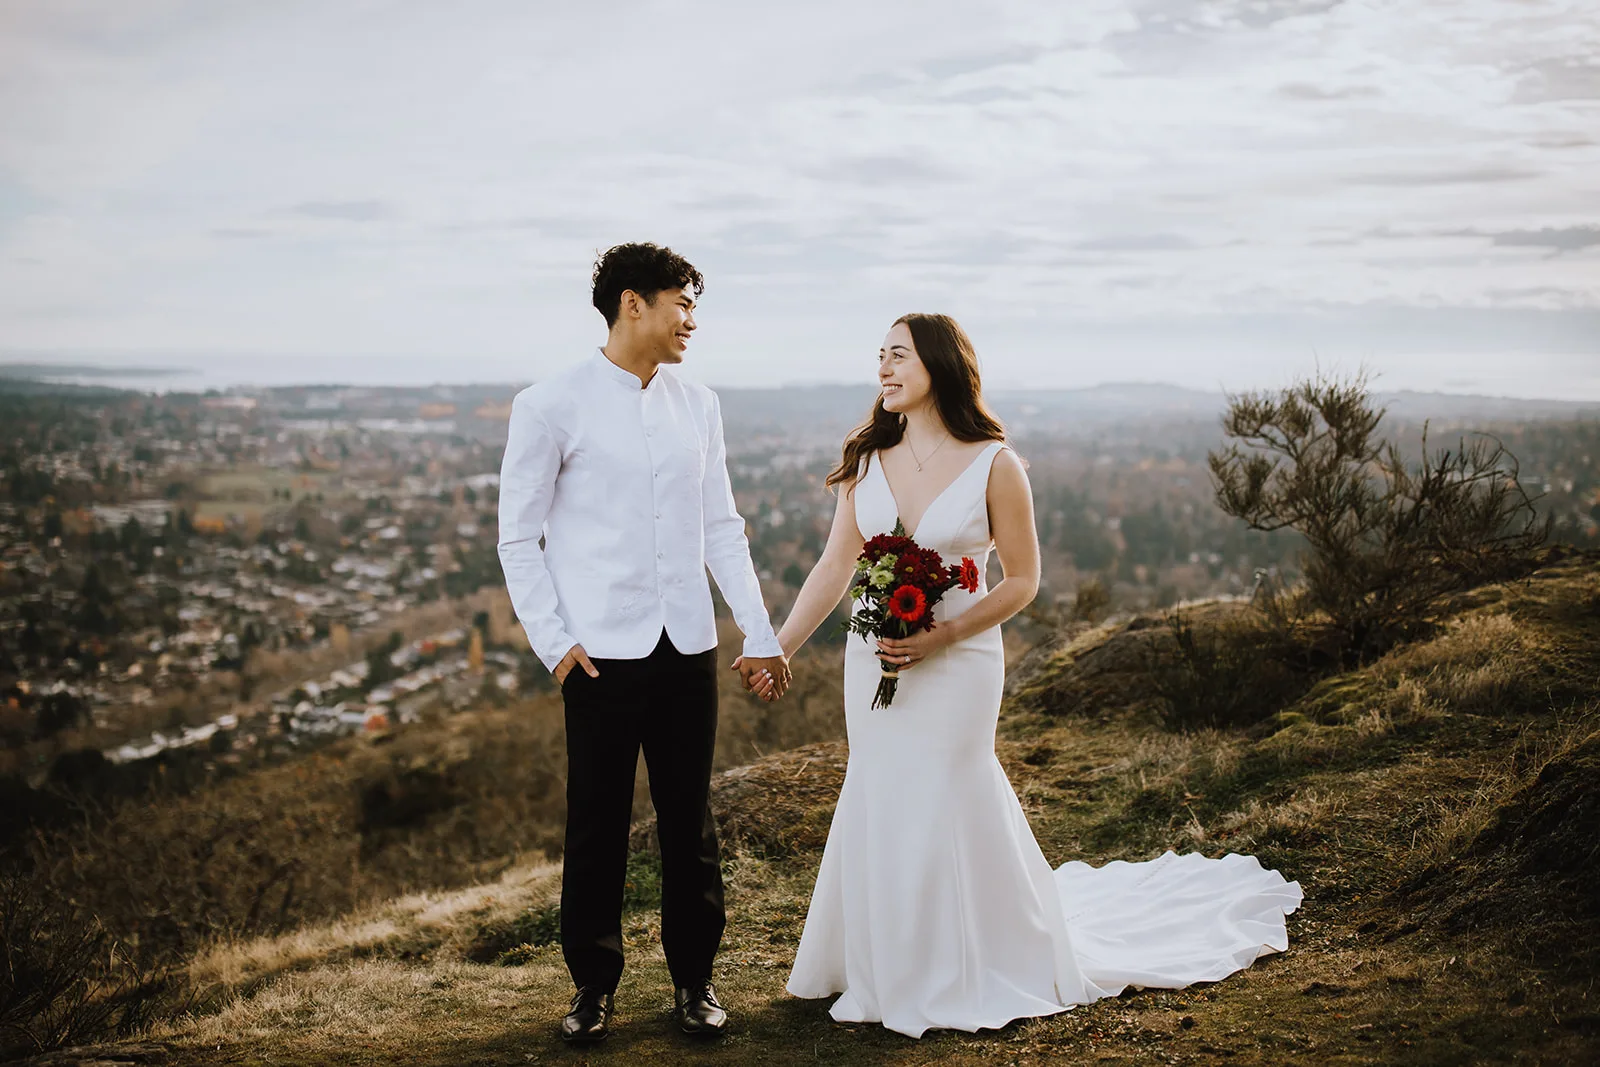 Bride and groom hold hands and smile at each other with a city view behind them